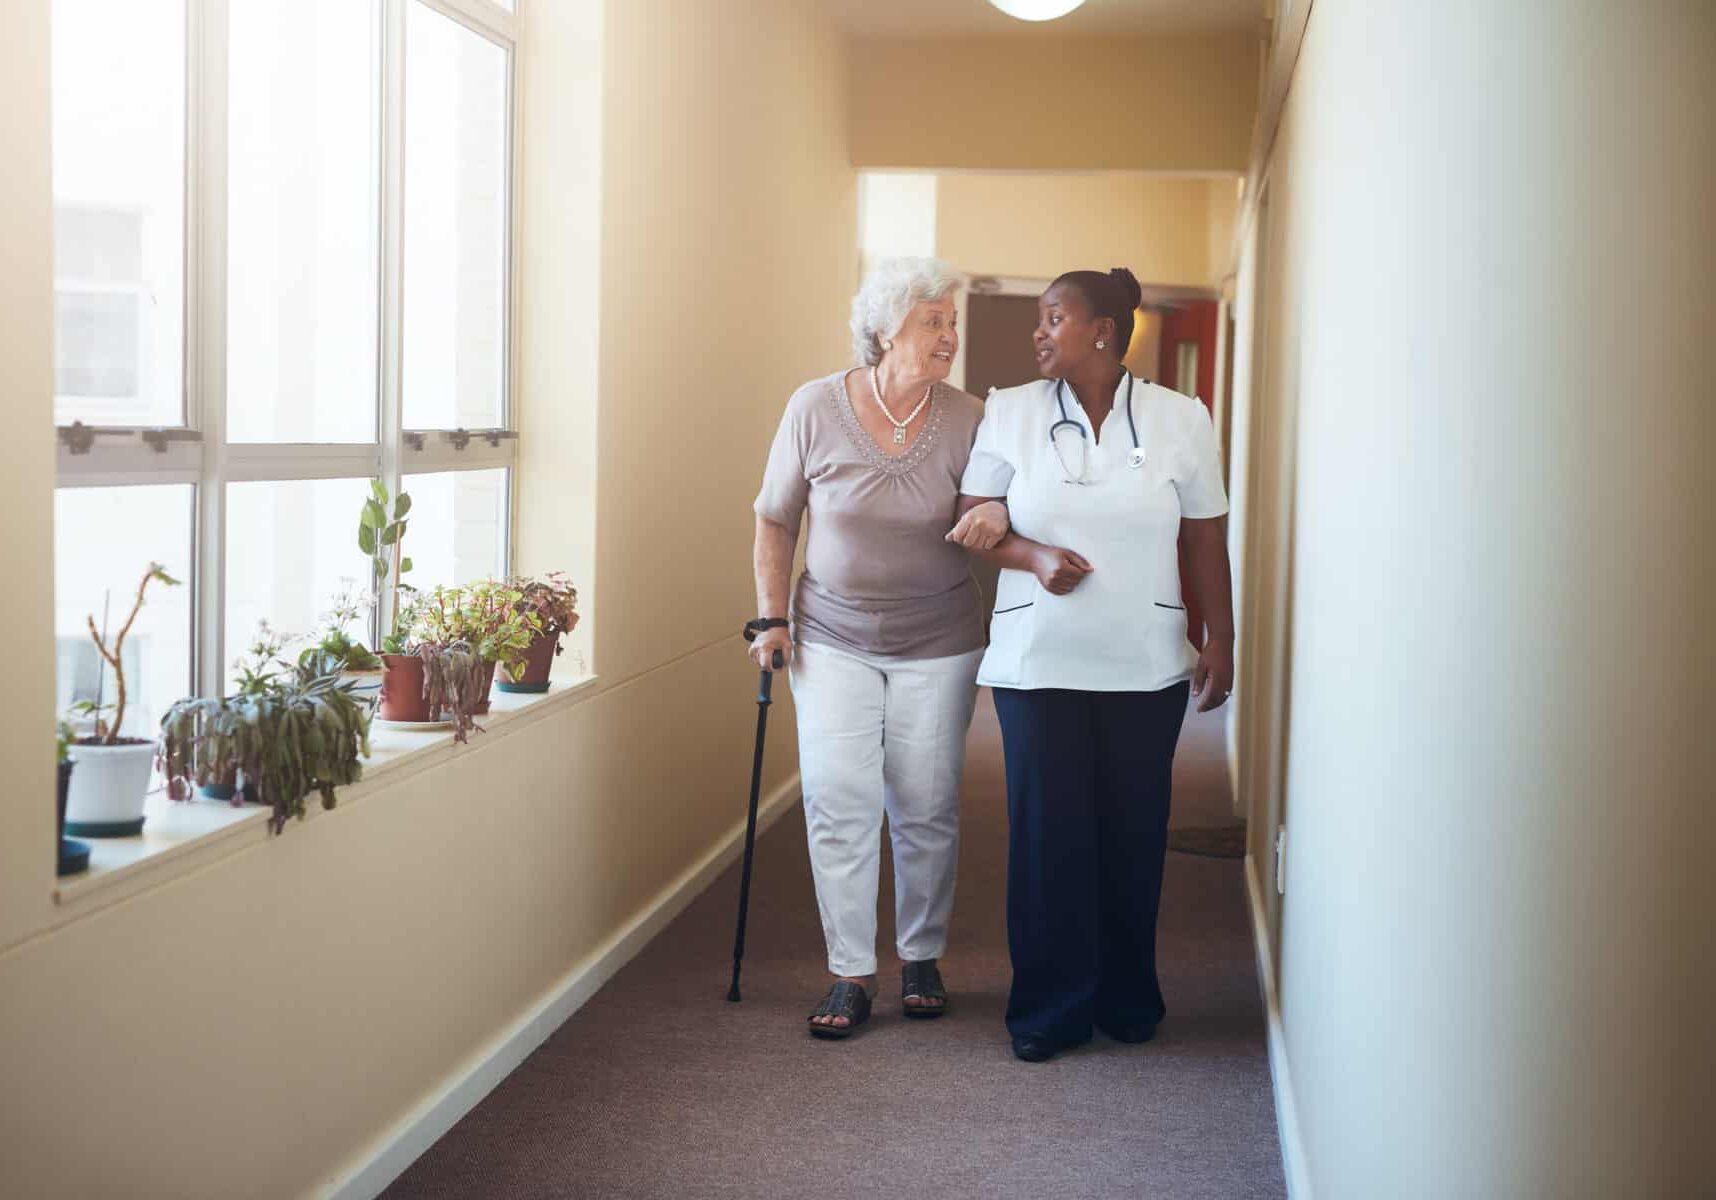 Full length portrait of senior woman walking with her nurse at nursing home. Healthcare work helping female patient.